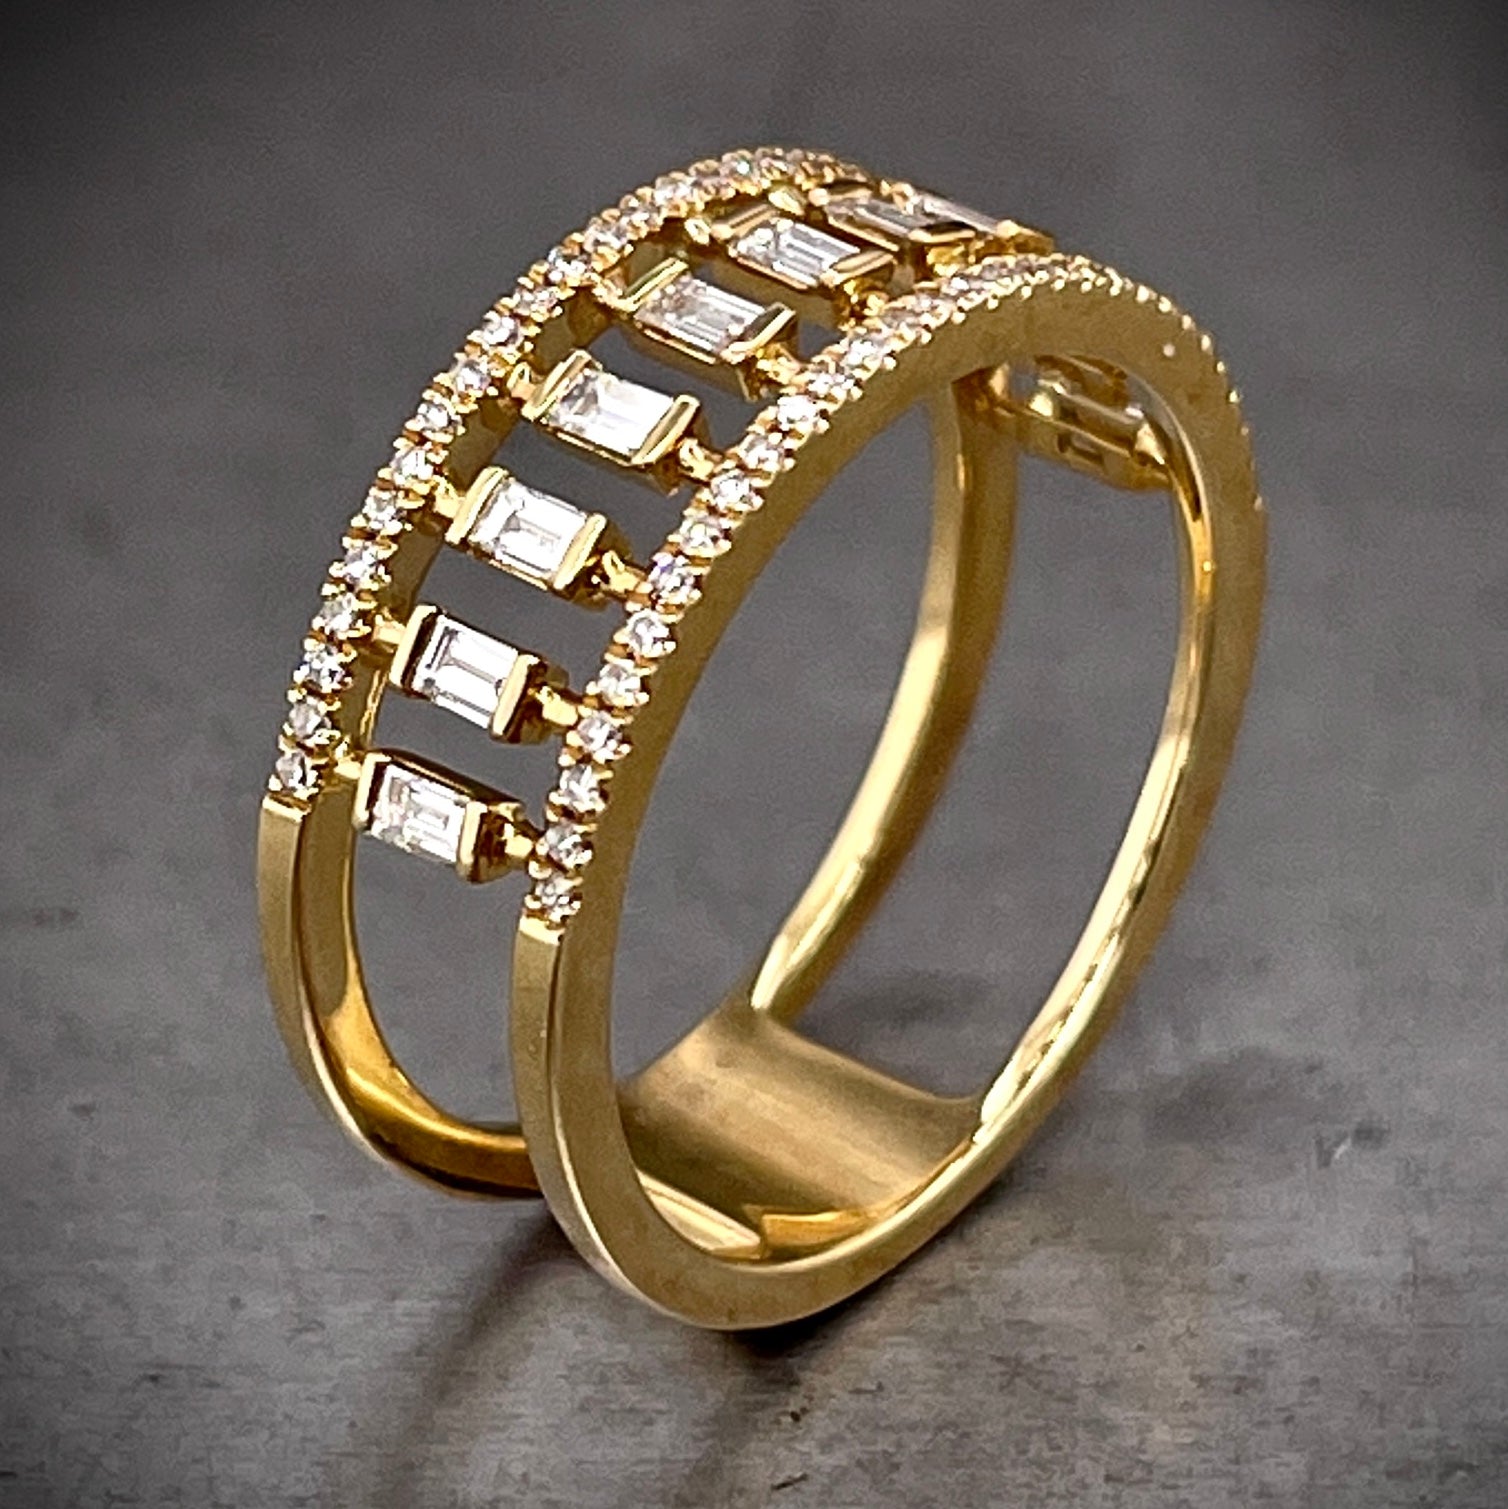 Angled aerial view of Baguette Diamond Cigarette Band. Here you can see baguette diamonds partial bezel set in the middle of the band. These baguettes travel across the shoulders of the ring but do not continue onto the back. Opposing either side of the baguettes is a row of round brilliant diamonds prong set. There are two shanks that form from the round diamonds and connect in the back with a block of gold.